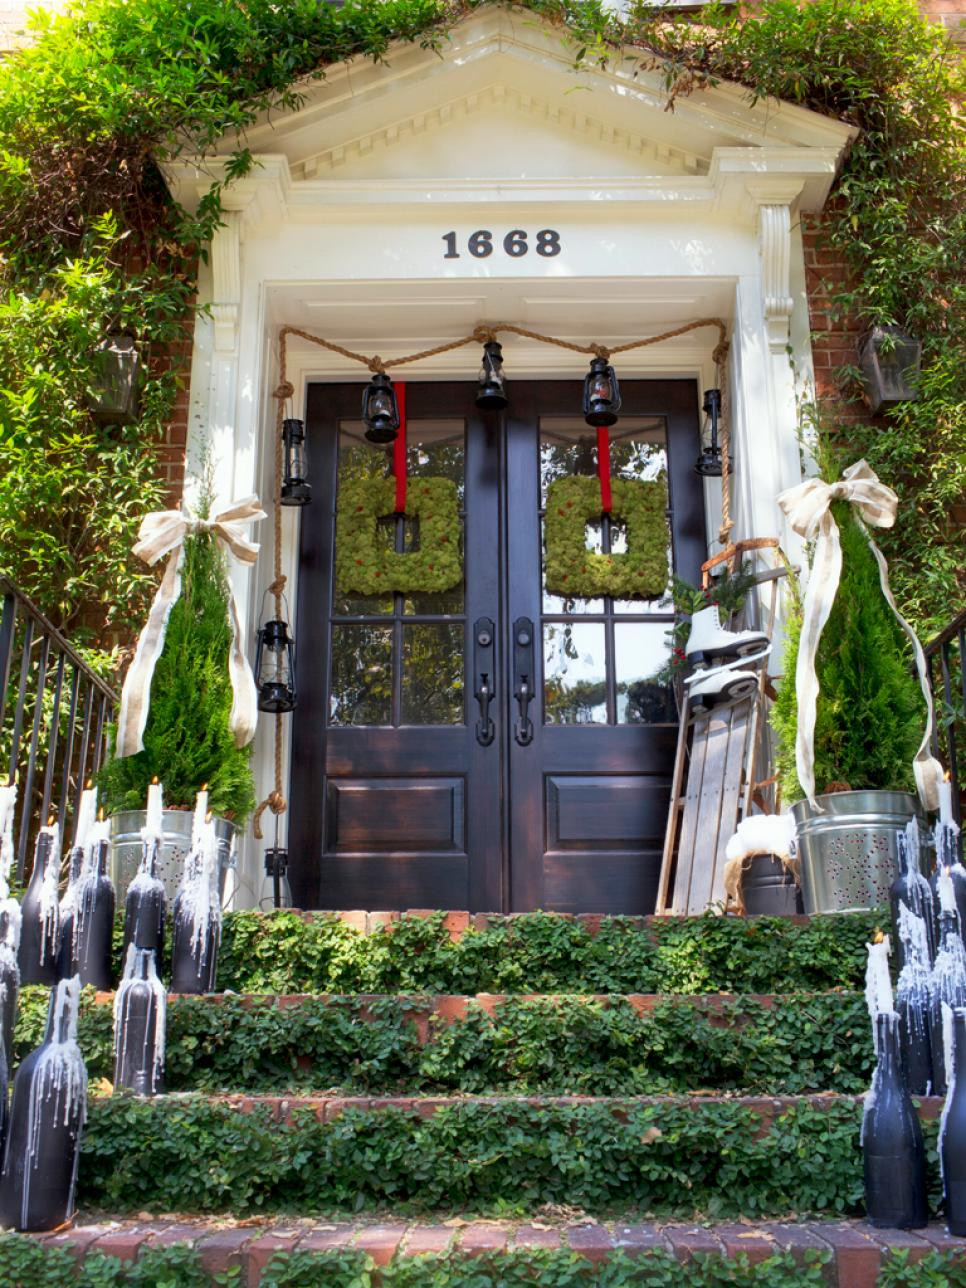 Outdoor Hanging Christmas Decorations
 Christmas Decorating Ideas For Porch Festival Around the